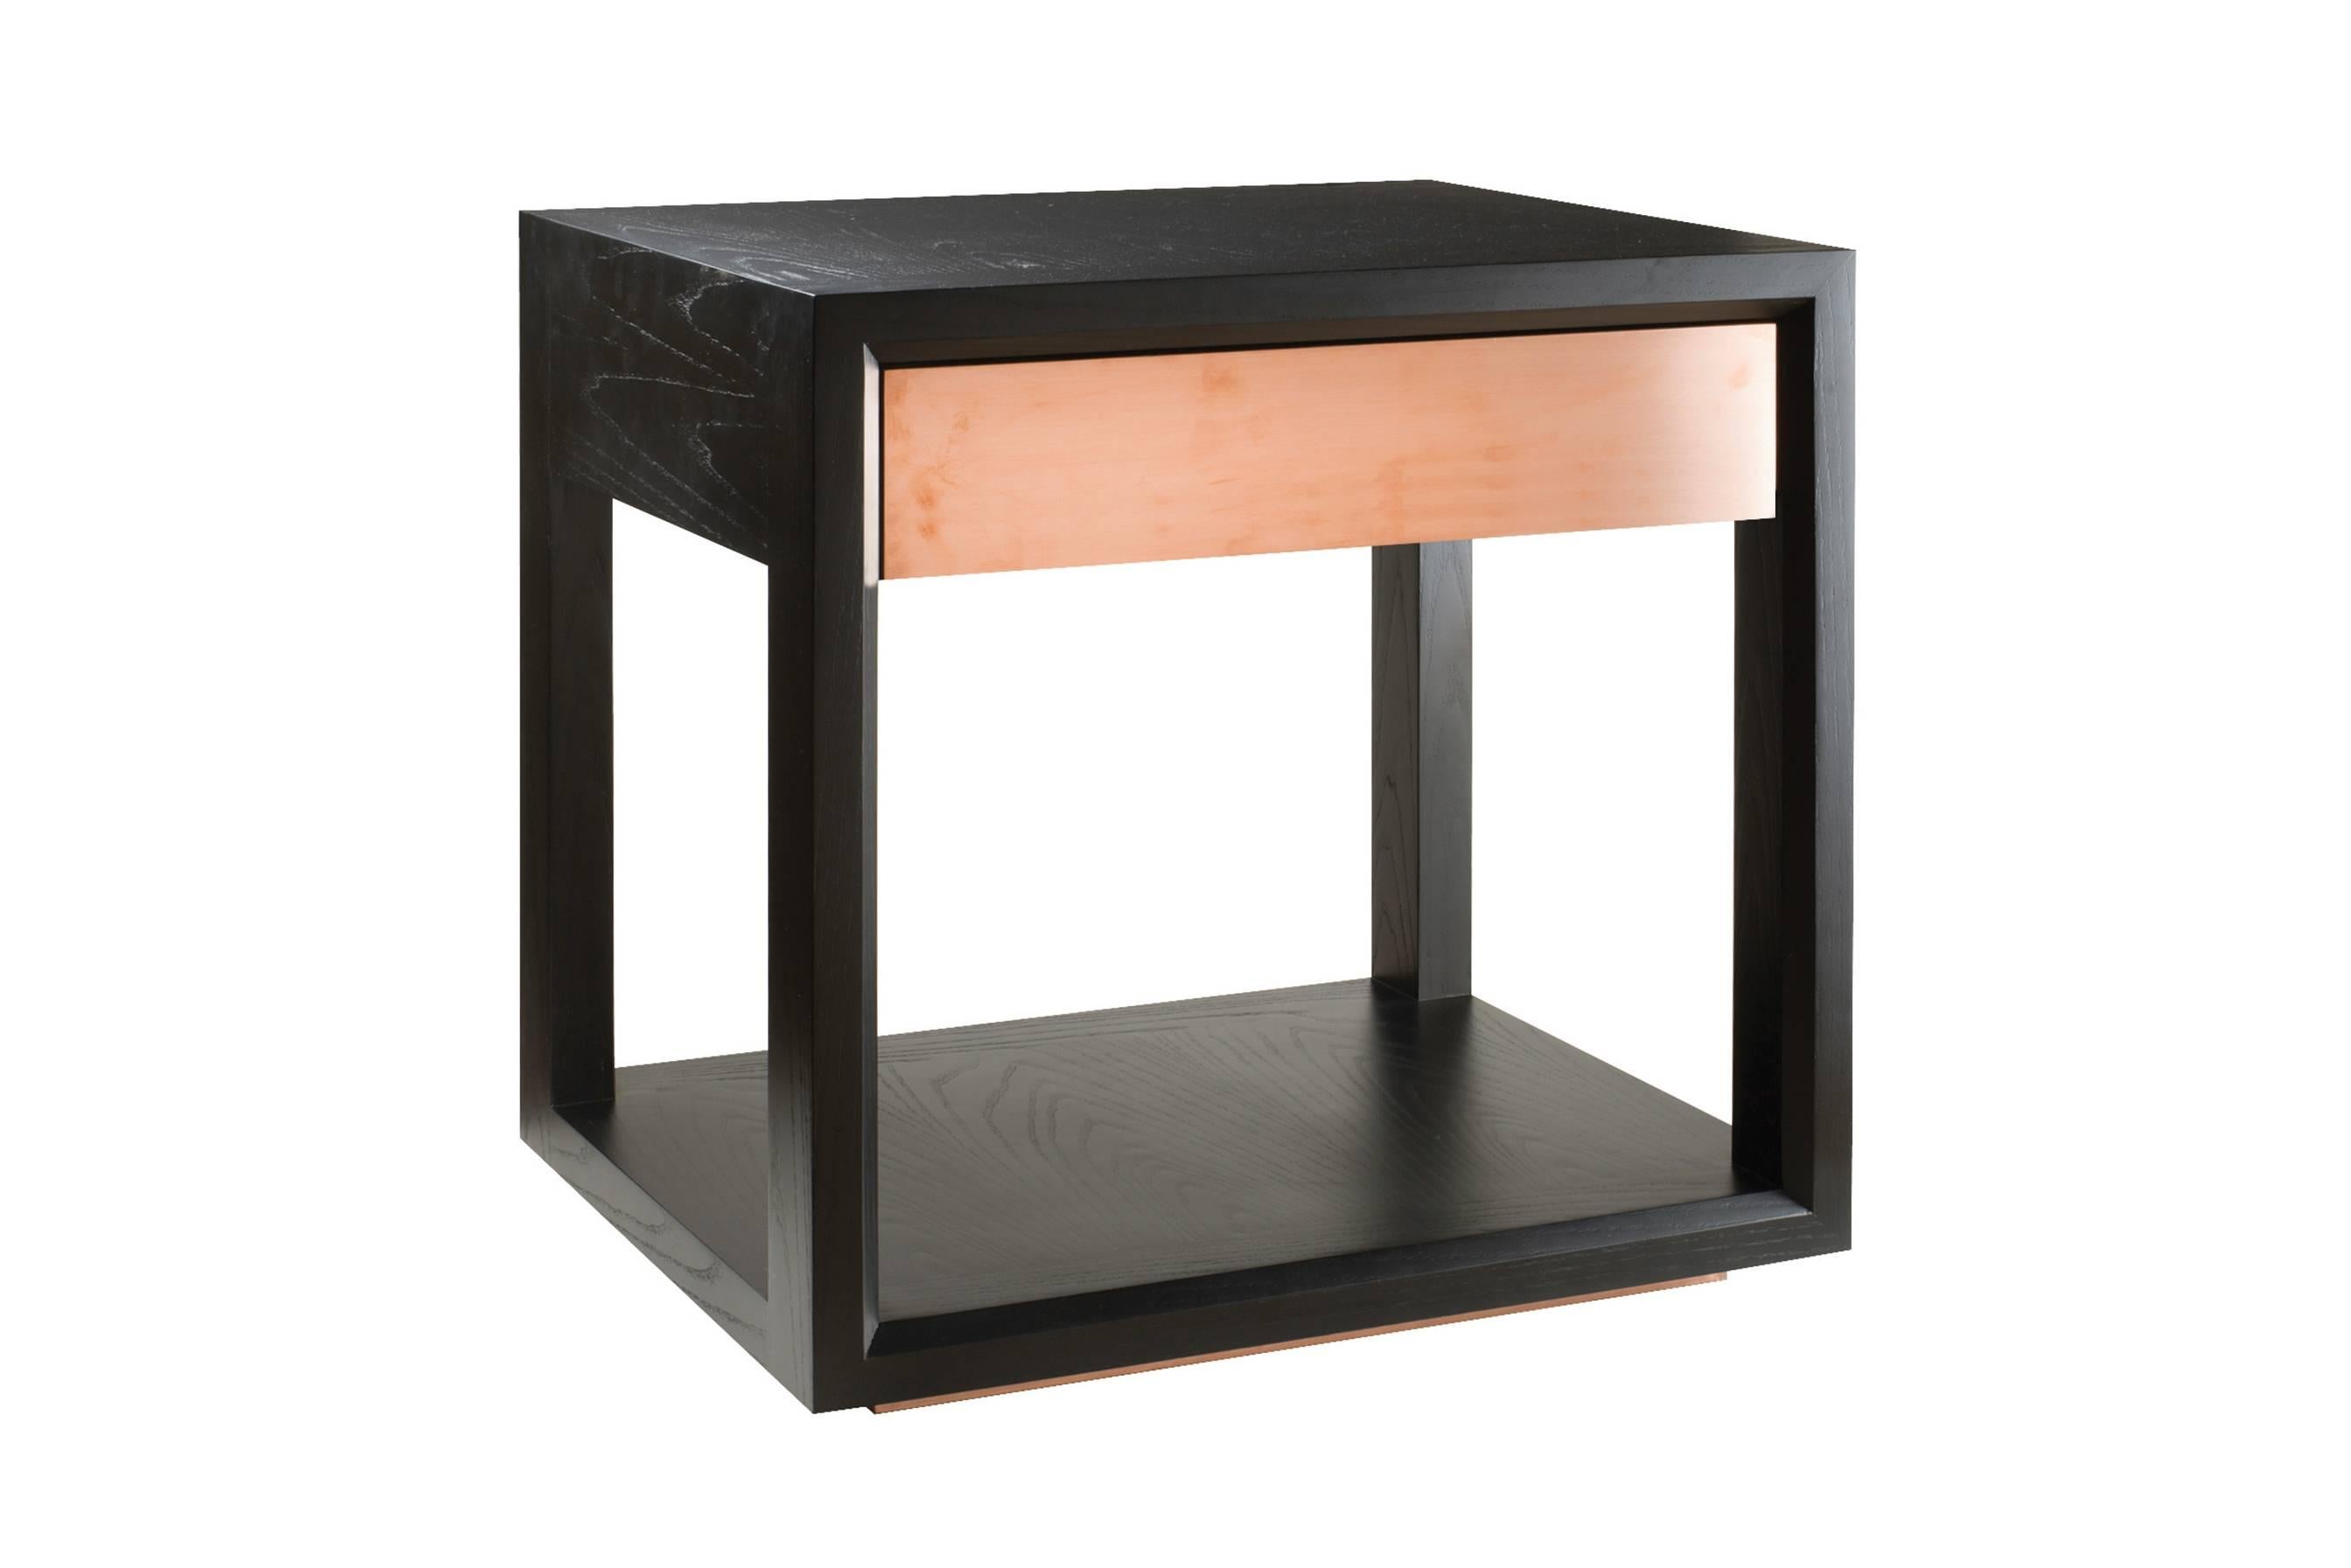 Shown and available in Charcoal Ash and Copper Drawer front.
Measure: 24in x 20in x 24in H.

List: $5432
Sale: $2600